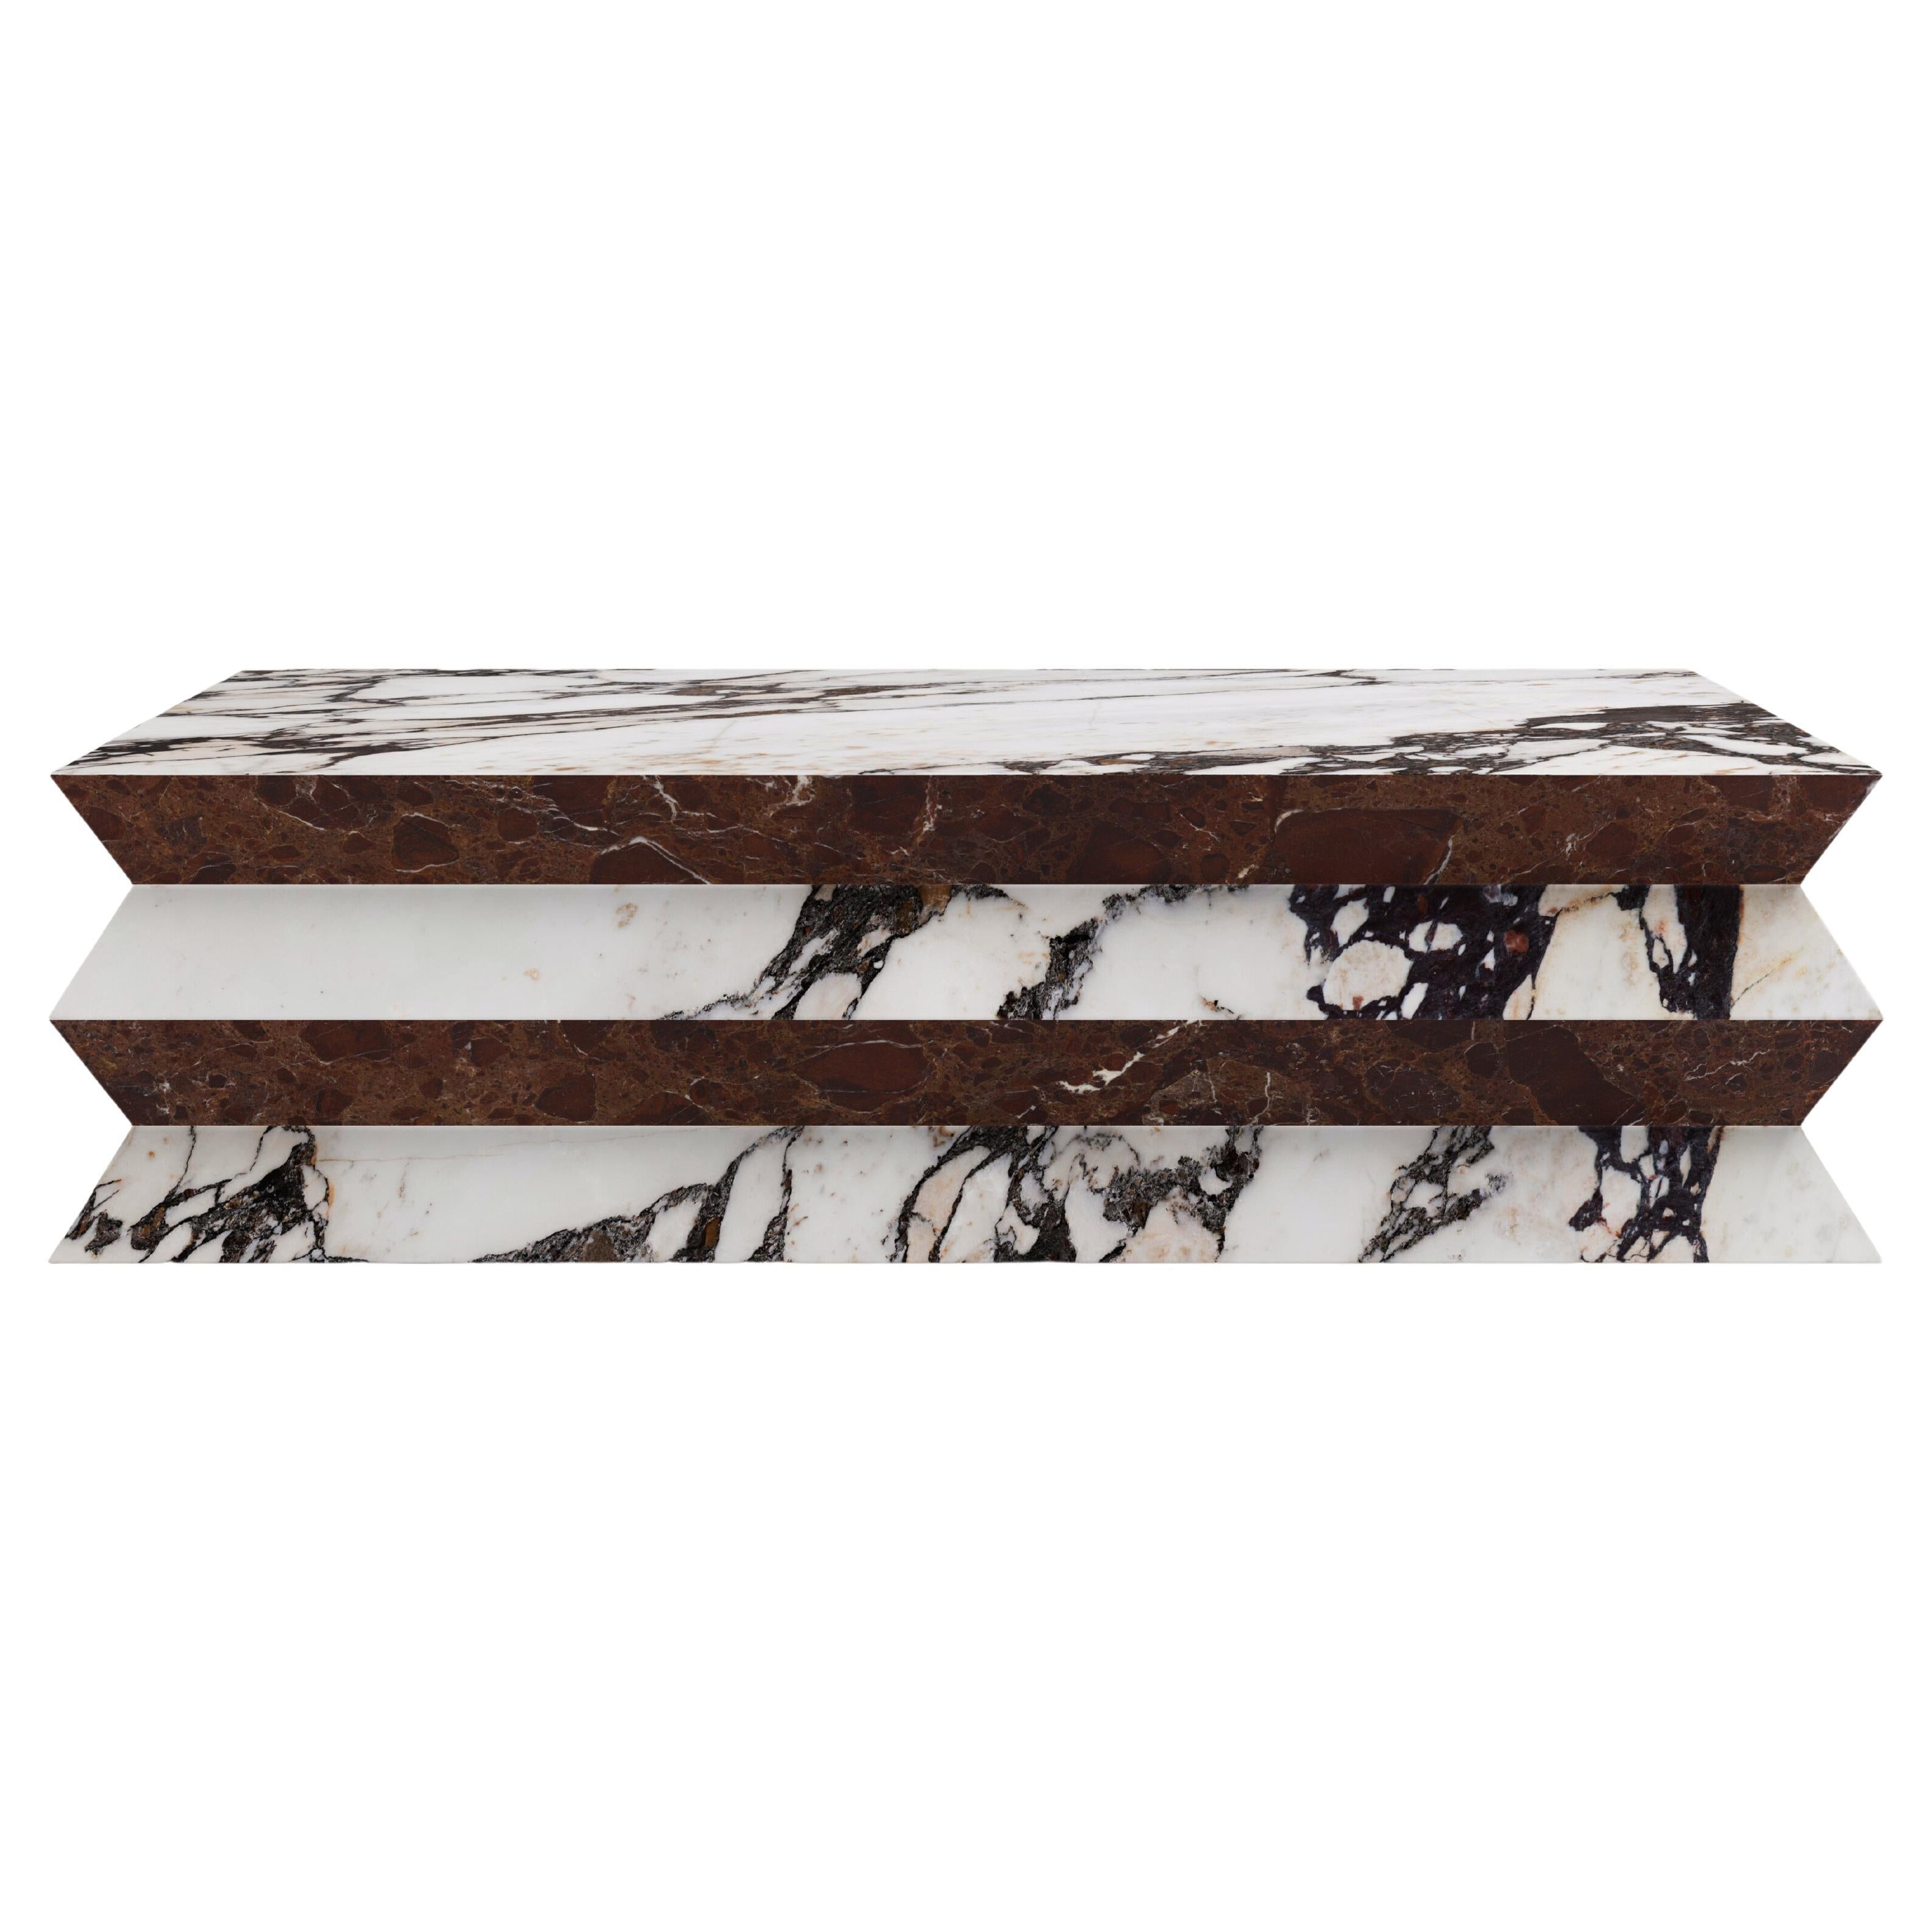 FORM(LA) Grinza Rectangle Coffee Table 48"L x 30"W x 16"H Calacatta Viola Marble For Sale